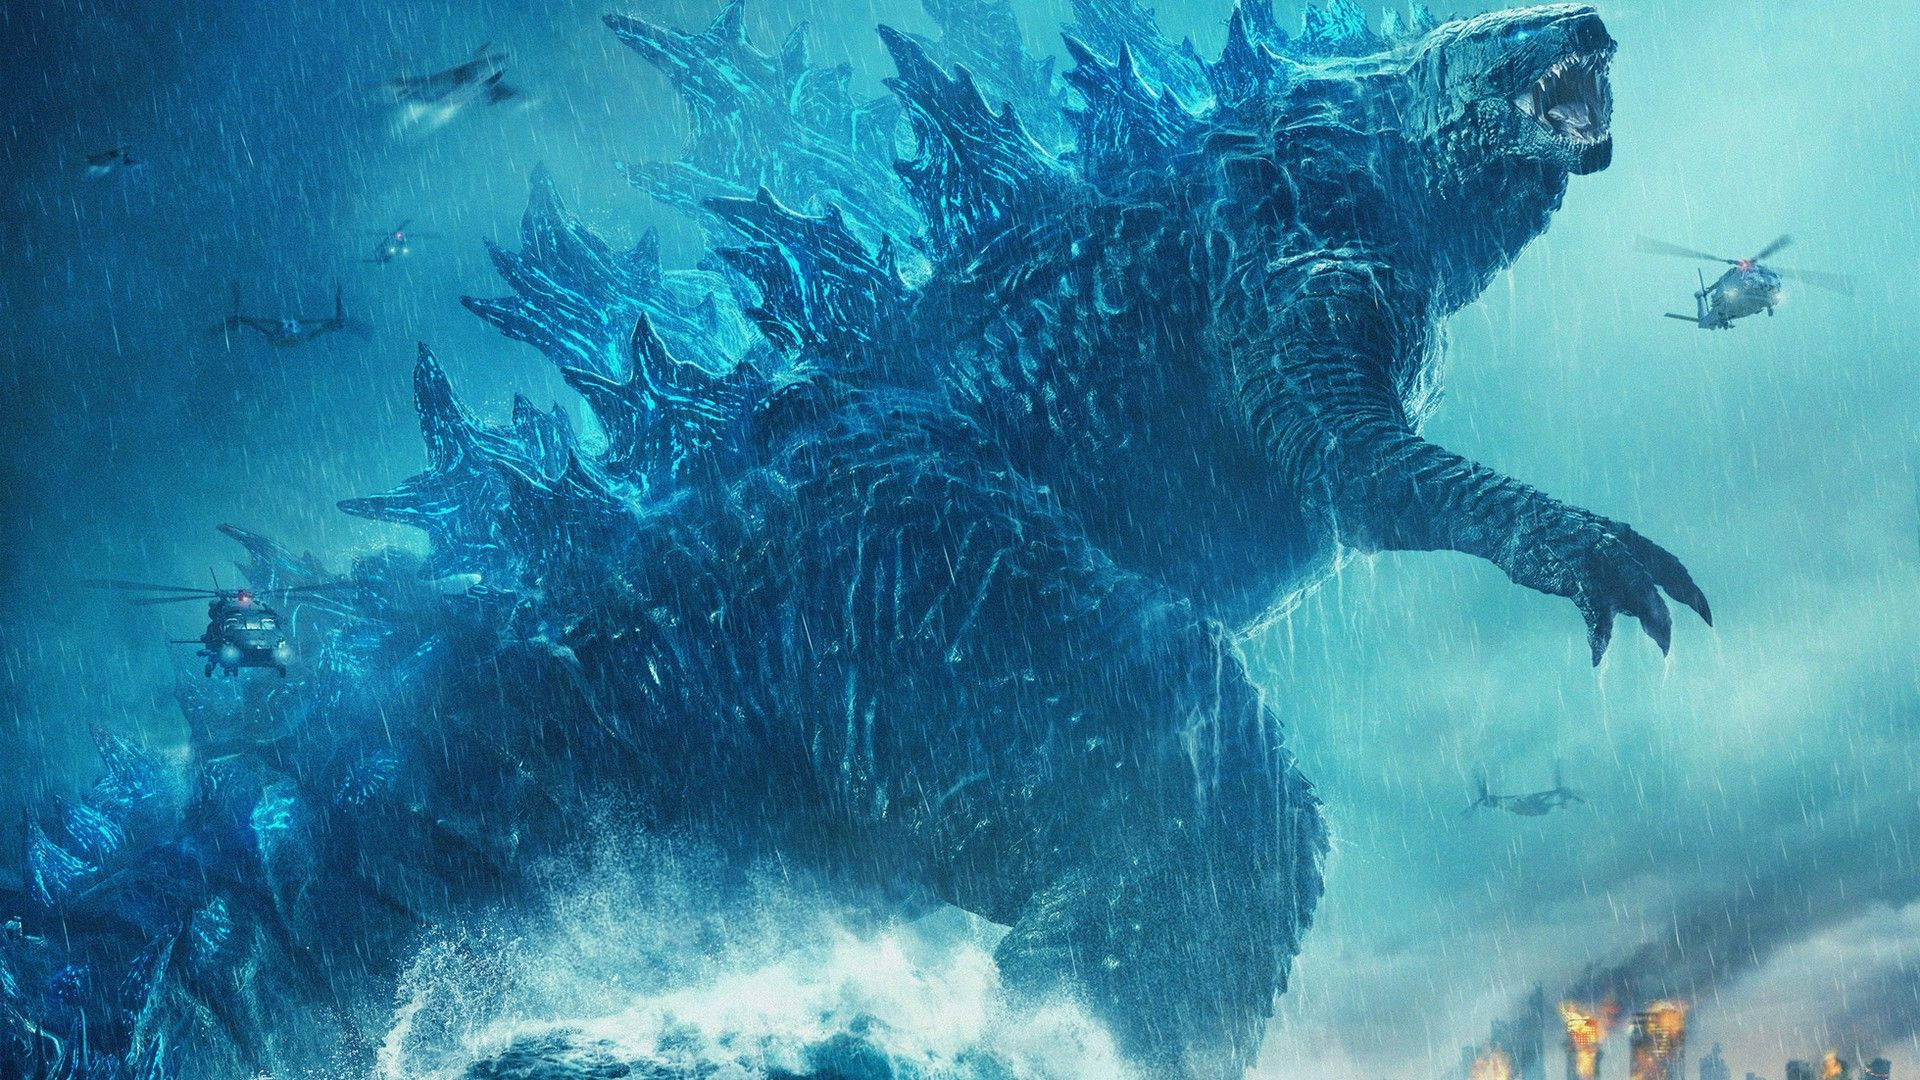 "The Furious and Mighty King Godzilla" Wallpaper